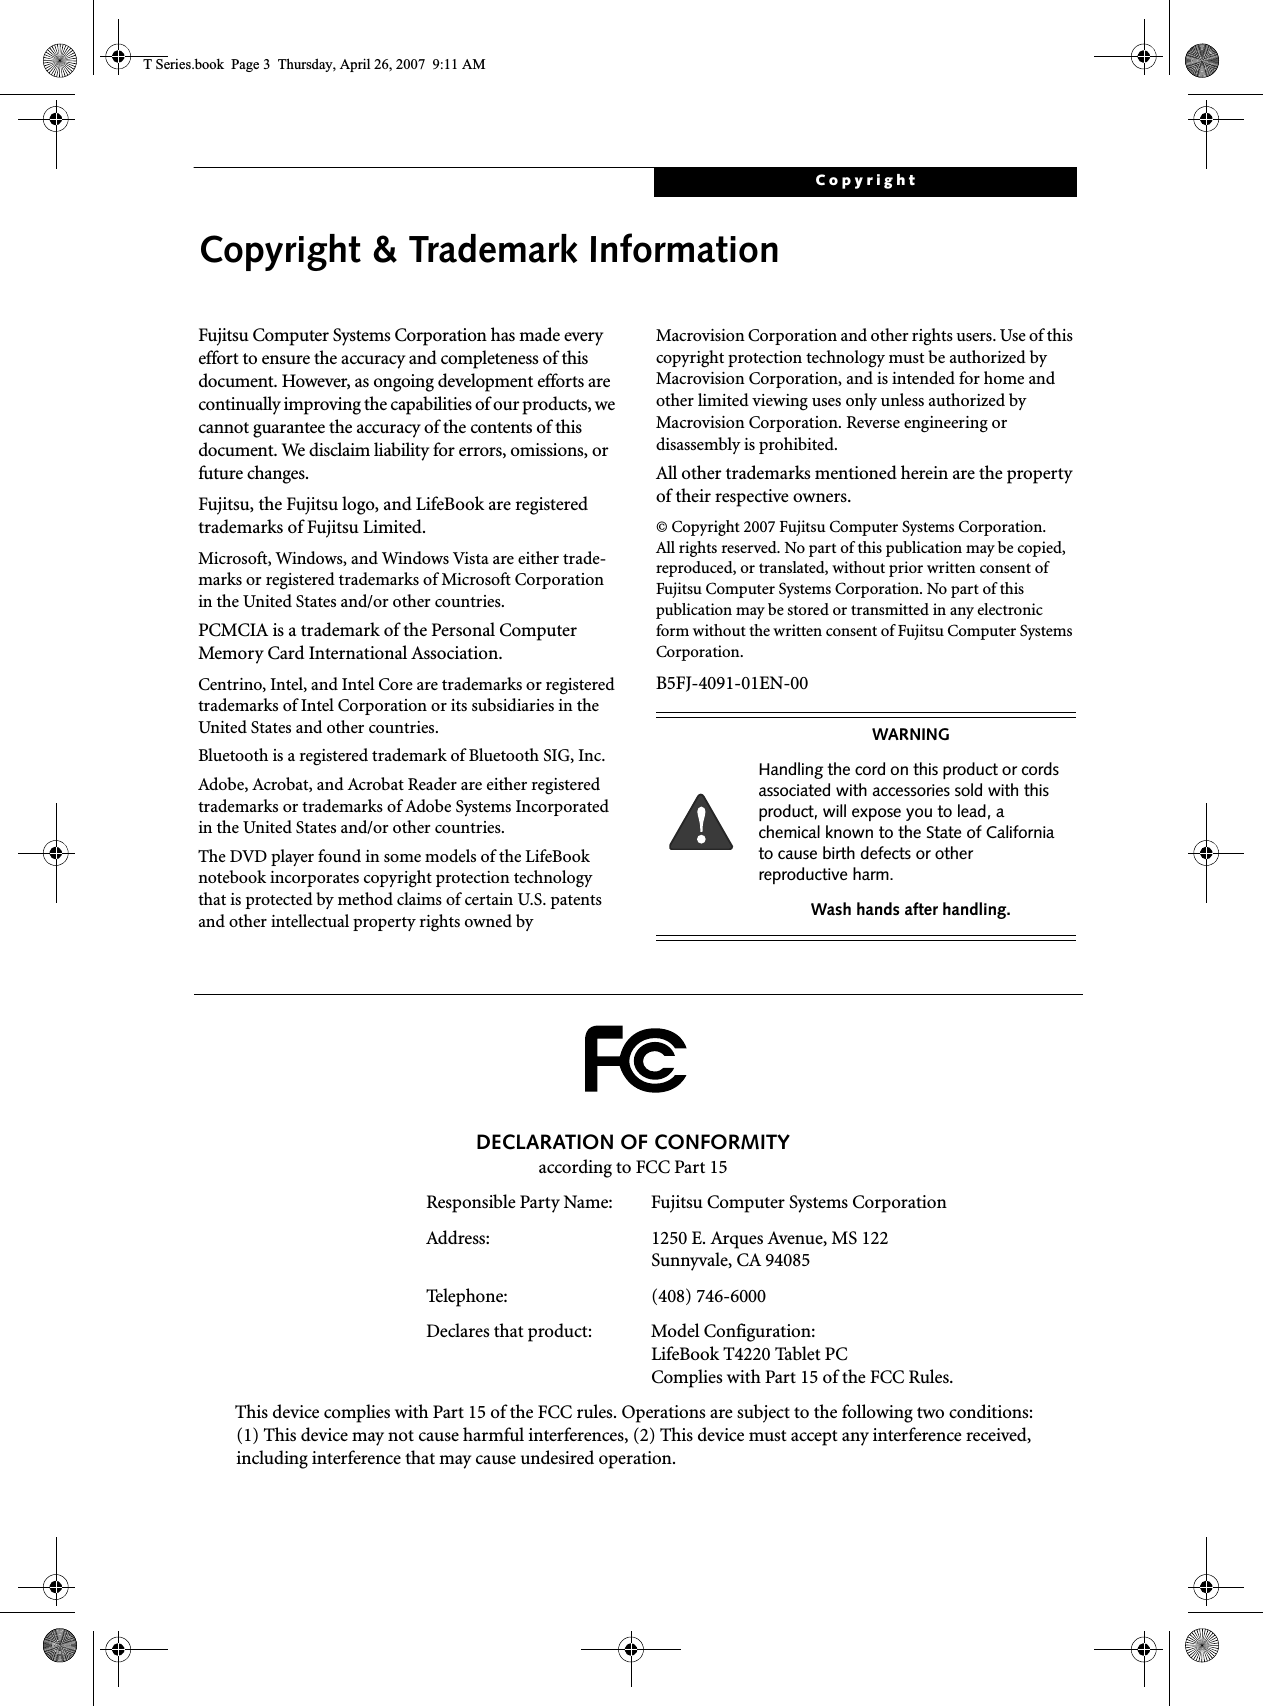 CopyrightCopyright &amp; Trademark InformationFujitsu Computer Systems Corporation has made every effort to ensure the accuracy and completeness of this document. However, as ongoing development efforts are continually improving the capabilities of our products, we cannot guarantee the accuracy of the contents of this document. We disclaim liability for errors, omissions, or future changes.Fujitsu, the Fujitsu logo, and LifeBook are registered trademarks of Fujitsu Limited.Microsoft, Windows, and Windows Vista are either trade-marks or registered trademarks of Microsoft Corporation in the United States and/or other countries.PCMCIA is a trademark of the Personal Computer Memory Card International Association.Centrino, Intel, and Intel Core are trademarks or registered trademarks of Intel Corporation or its subsidiaries in the United States and other countries.Bluetooth is a registered trademark of Bluetooth SIG, Inc.Adobe, Acrobat, and Acrobat Reader are either registered trademarks or trademarks of Adobe Systems Incorporated in the United States and/or other countries.The DVD player found in some models of the LifeBook notebook incorporates copyright protection technology that is protected by method claims of certain U.S. patents and other intellectual property rights owned by Macrovision Corporation and other rights users. Use of this copyright protection technology must be authorized by Macrovision Corporation, and is intended for home and other limited viewing uses only unless authorized by Macrovision Corporation. Reverse engineering or disassembly is prohibited.All other trademarks mentioned herein are the property of their respective owners.© Copyright 2007 Fujitsu Computer Systems Corporation.All rights reserved. No part of this publication may be copied, reproduced, or translated, without prior written consent of Fujitsu Computer Systems Corporation. No part of this publication may be stored or transmitted in any electronic form without the written consent of Fujitsu Computer Systems Corporation.B5FJ-4091-01EN-00WARNINGHandling the cord on this product or cords associated with accessories sold with this product, will expose you to lead, a chemical known to the State of California to cause birth defects or other reproductive harm. Wash hands after handling.DECLARATION OF CONFORMITYaccording to FCC Part 15Responsible Party Name: Fujitsu Computer Systems CorporationAddress:  1250 E. Arques Avenue, MS 122Sunnyvale, CA 94085Telephone: (408) 746-6000Declares that product: Model Configuration:LifeBook T4220 Tablet PCComplies with Part 15 of the FCC Rules.This device complies with Part 15 of the FCC rules. Operations are subject to the following two conditions:(1) This device may not cause harmful interferences, (2) This device must accept any interference received, including interference that may cause undesired operation.T Series.book  Page 3  Thursday, April 26, 2007  9:11 AM